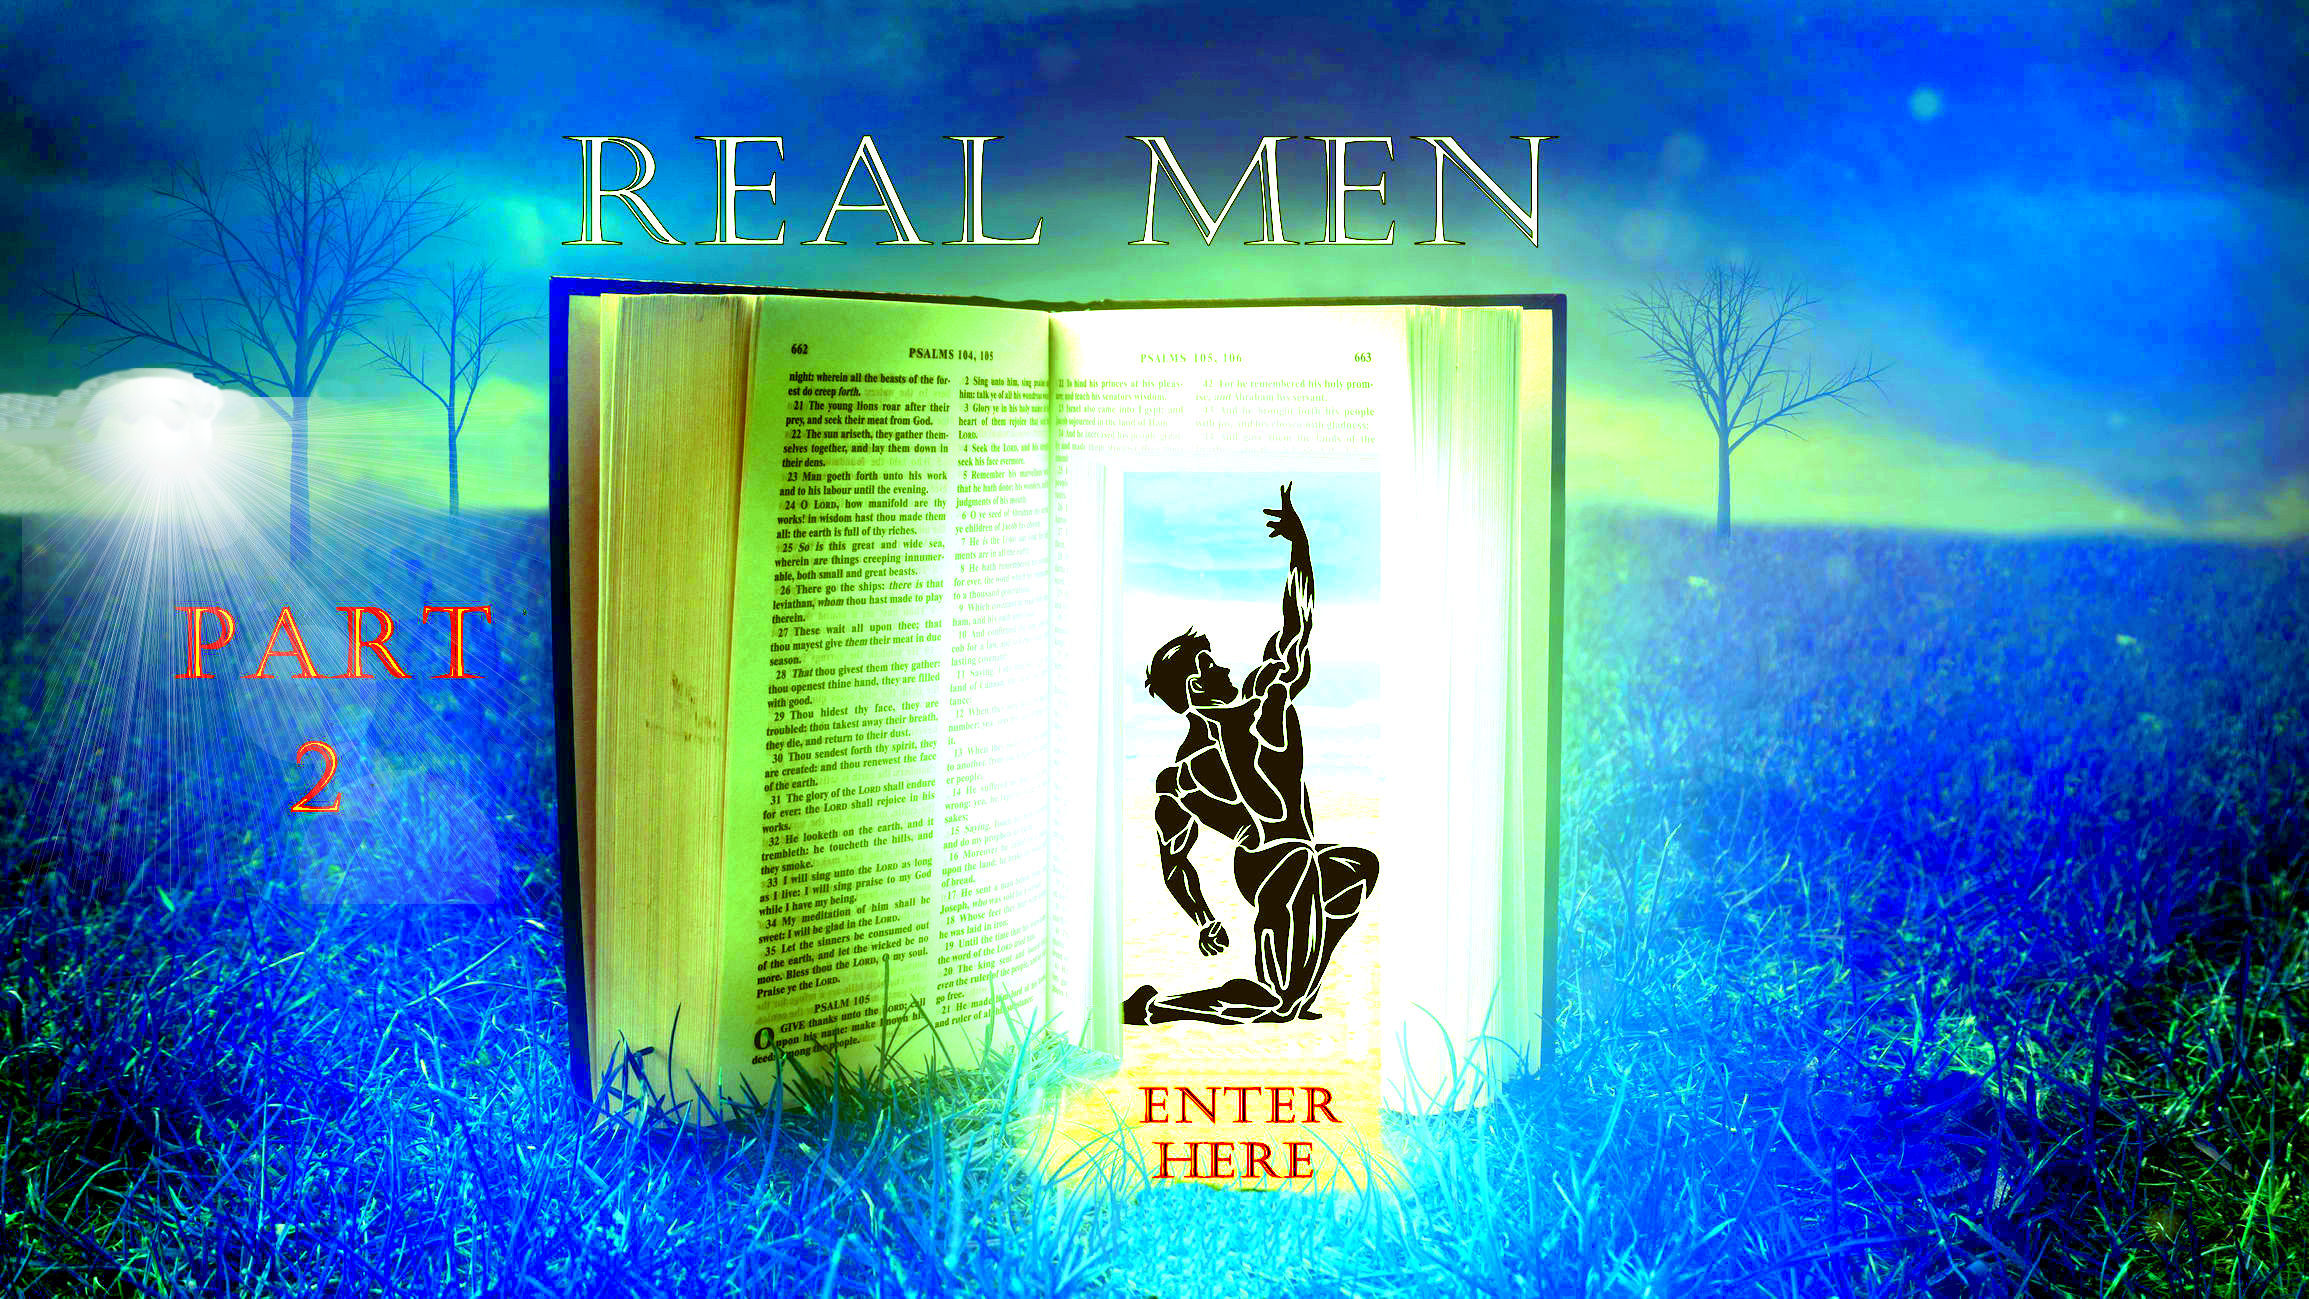 Now Is The Time: Real Men Step Foward…Part 2